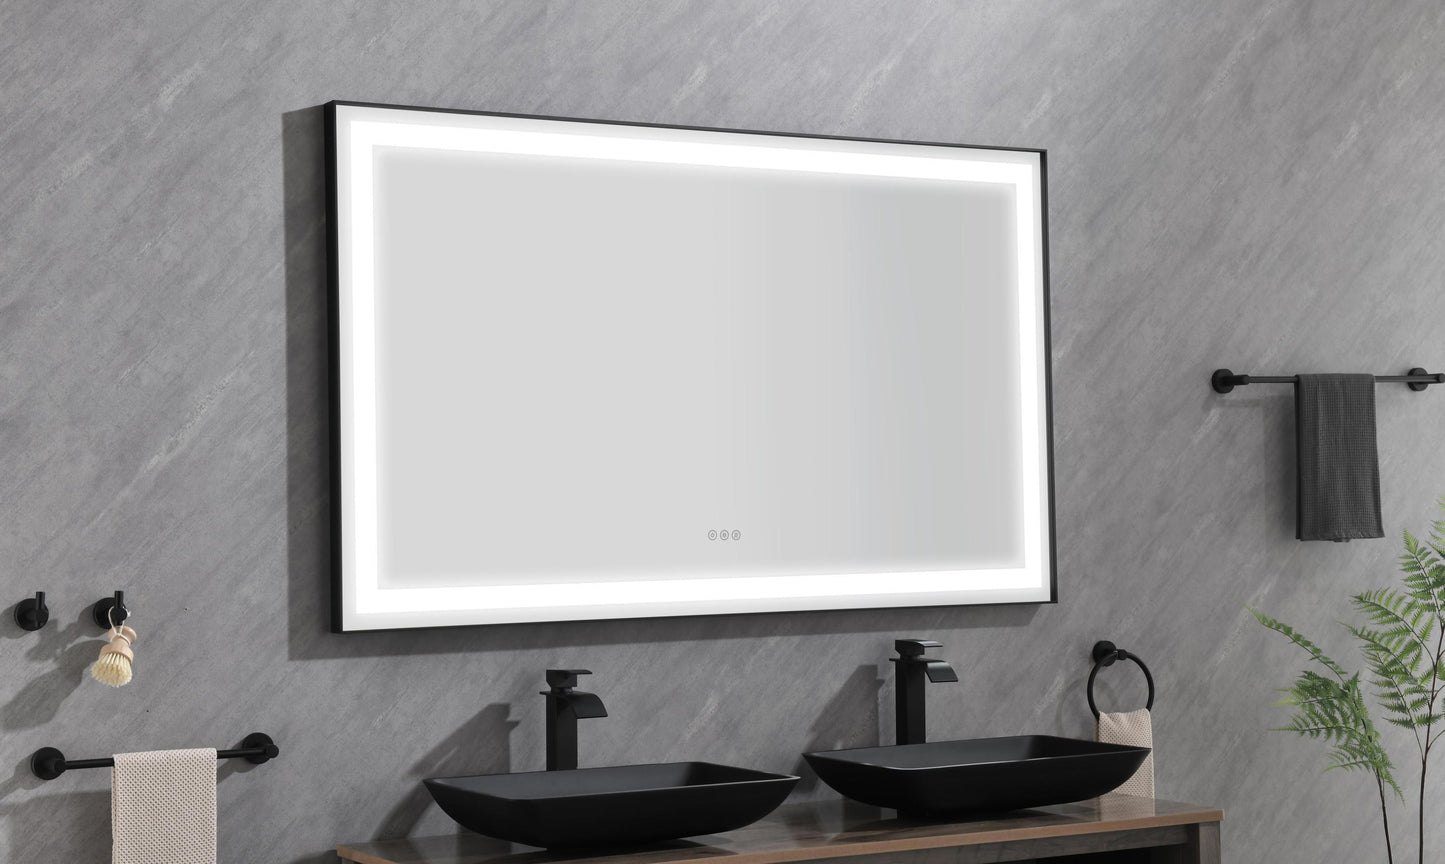 LTL needs to consult the warehouse address60*48 LED Lighted Bathroom Wall Mounted Mirror with High Lumen+Anti-Fog Separately Control